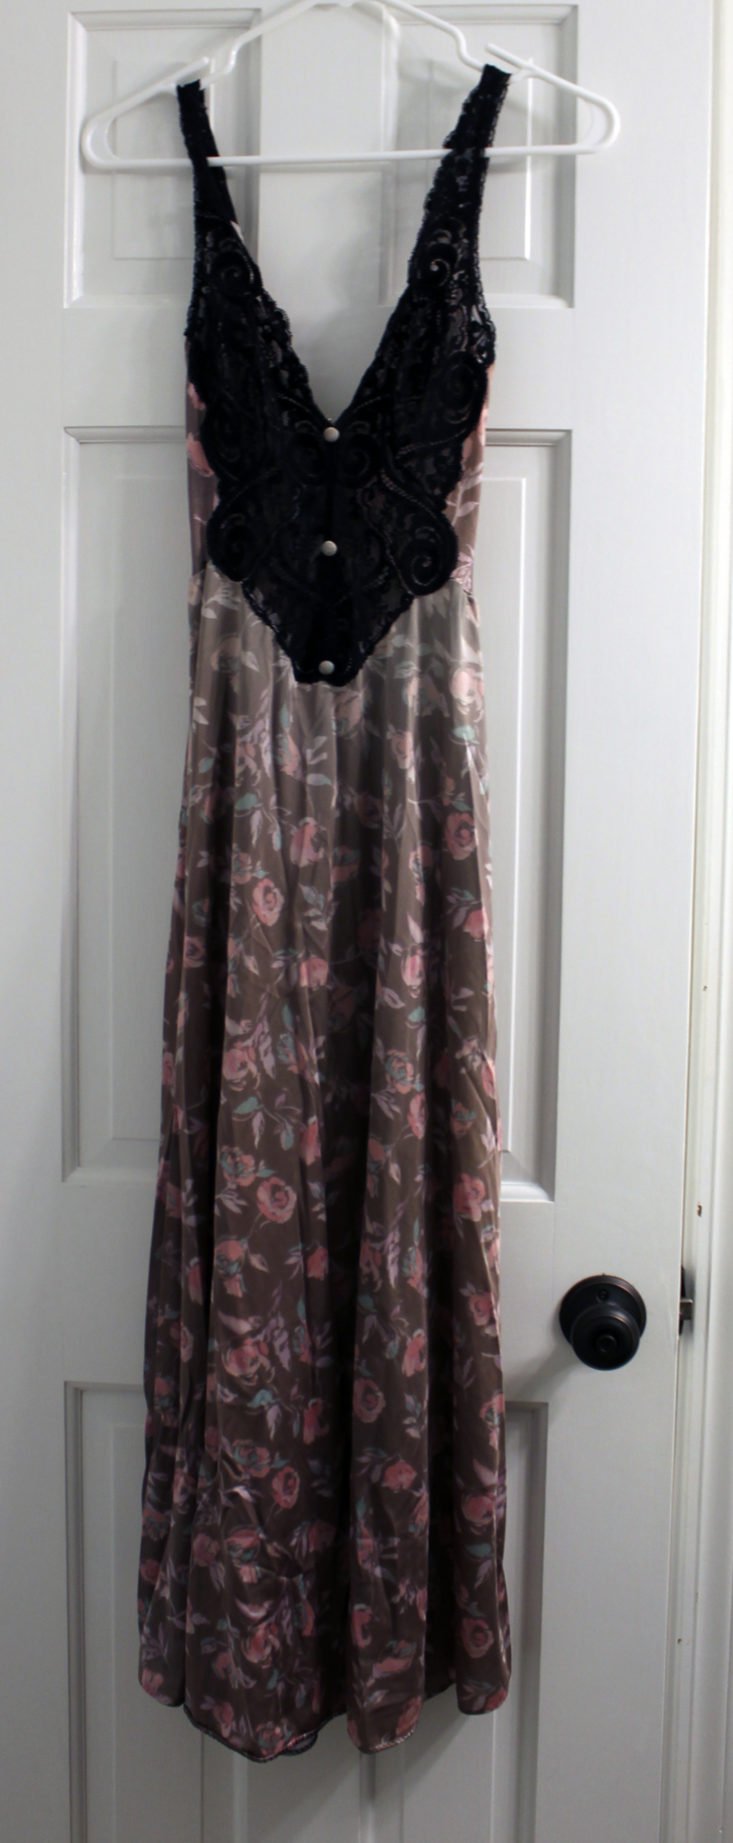 CHC Vintage Lingerie November 2018 - Nightgown Front